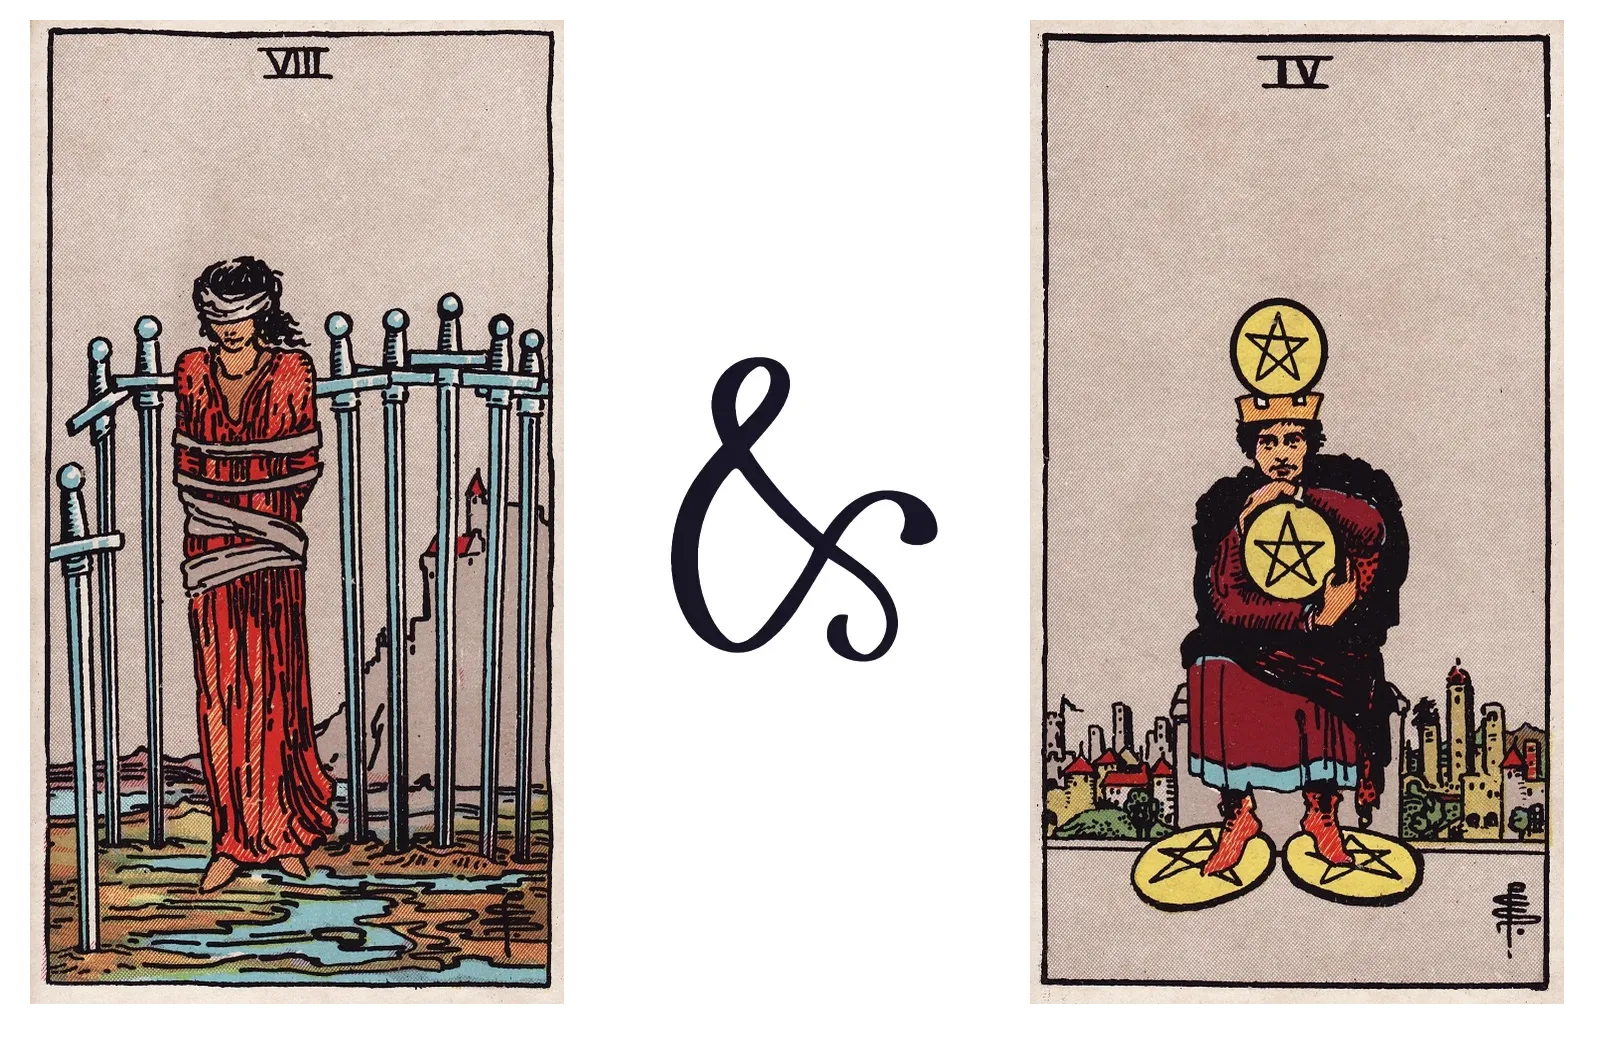 Eight of Swords and Four of Pentacles